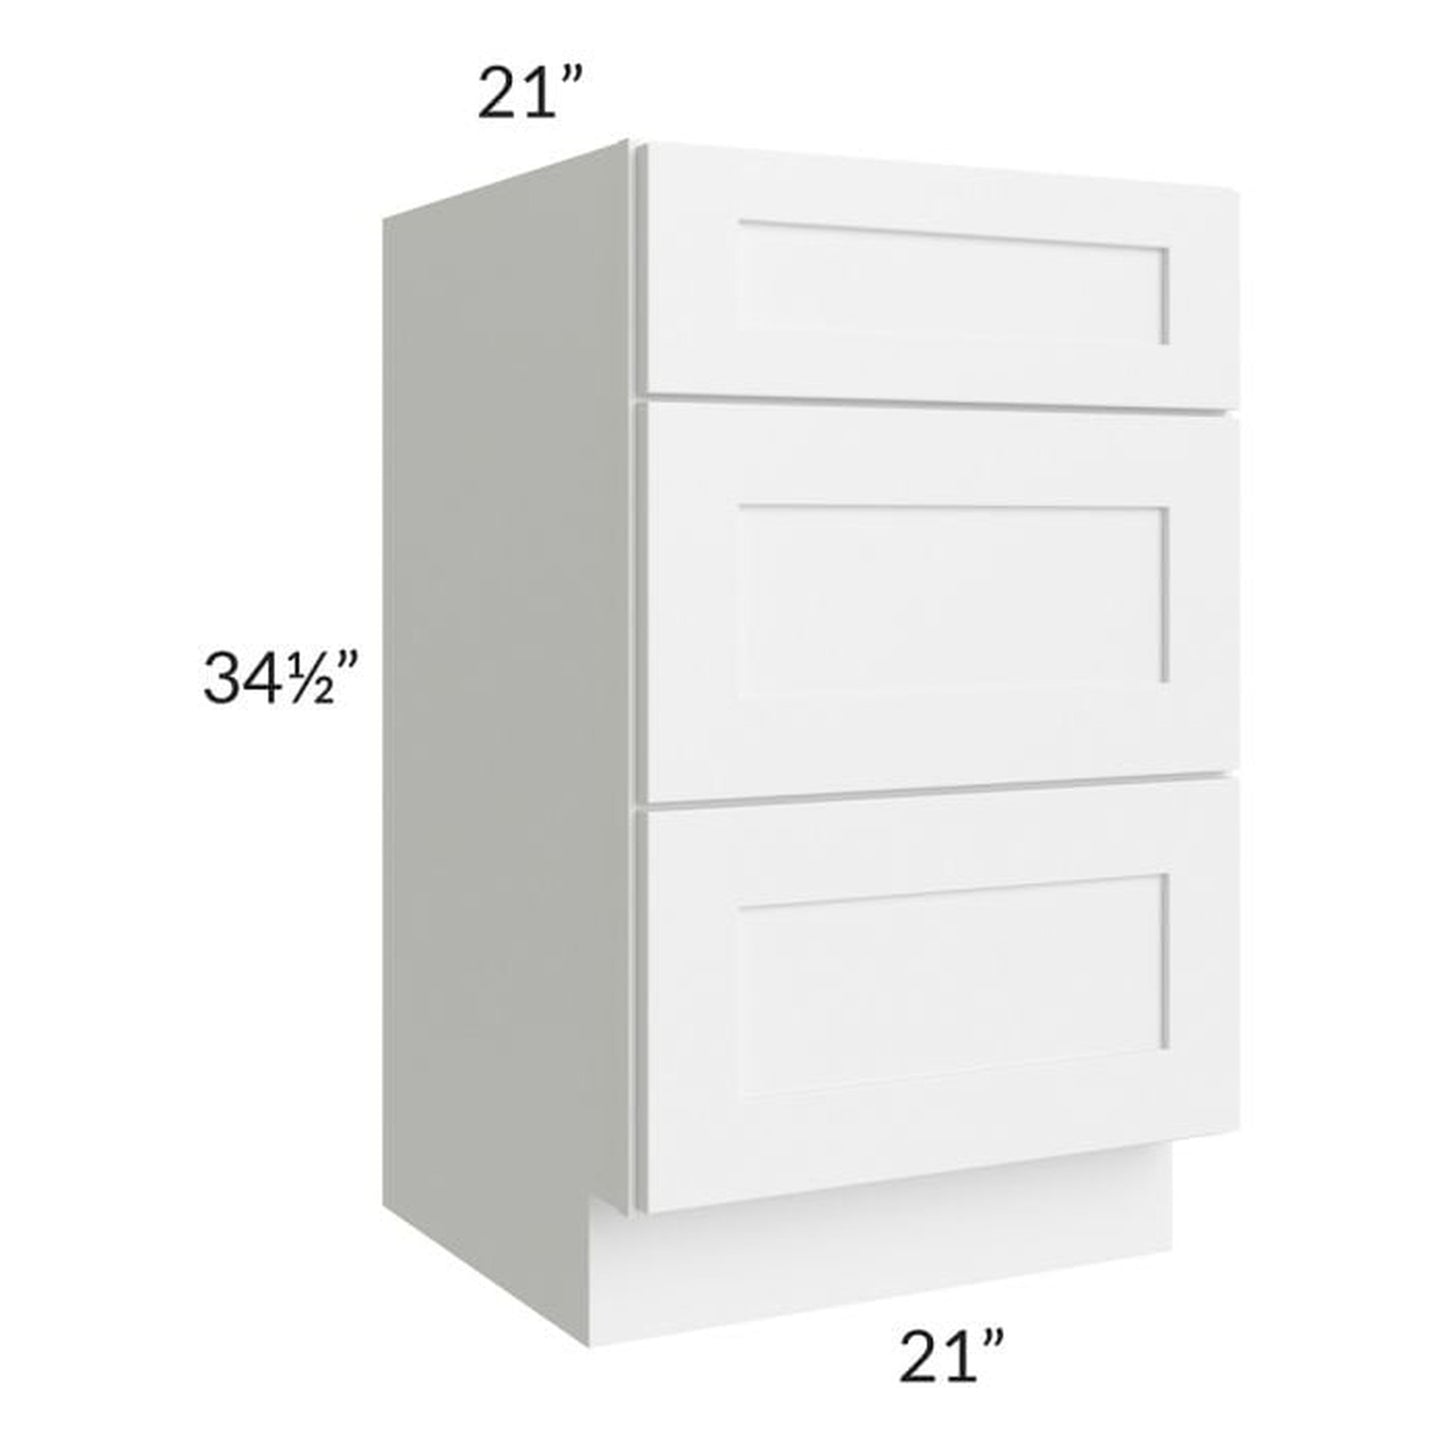 RTA Frosted White Shaker 21" Vanity Three Drawer Base Cabinet with 1 Decorative End Panel